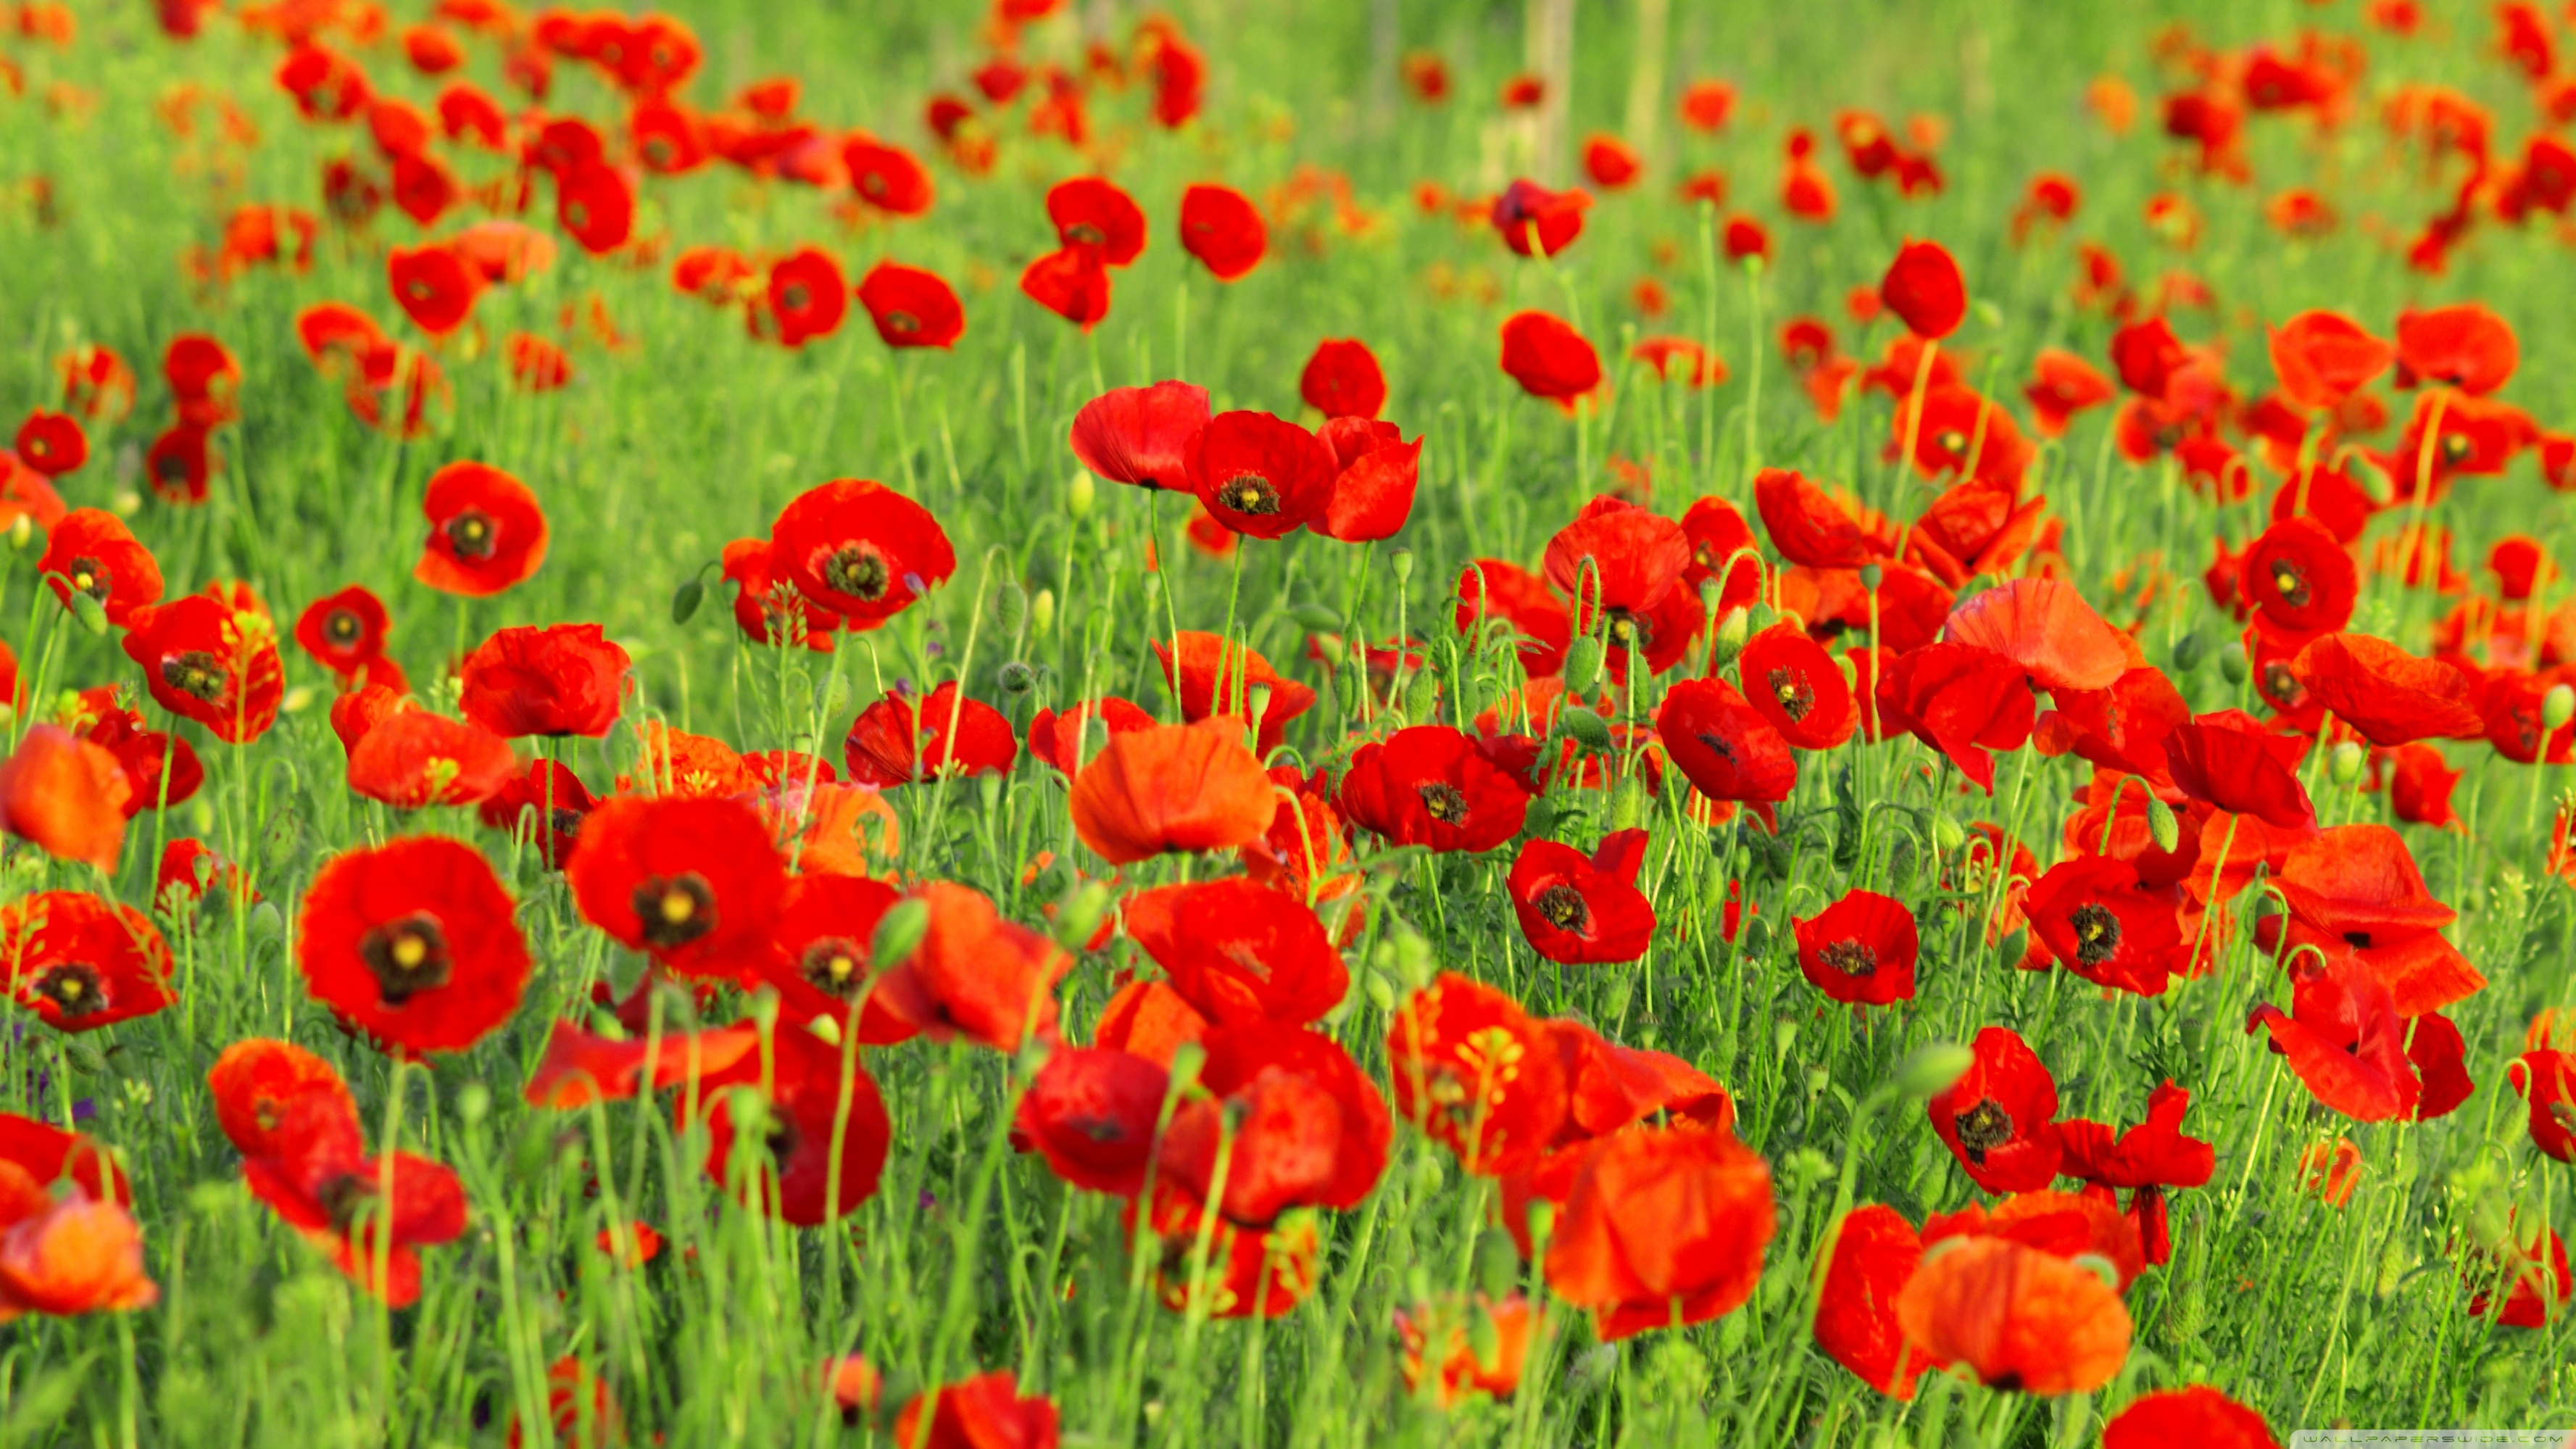 Red Poppies Field Wallpaper And Image Pictures Photos